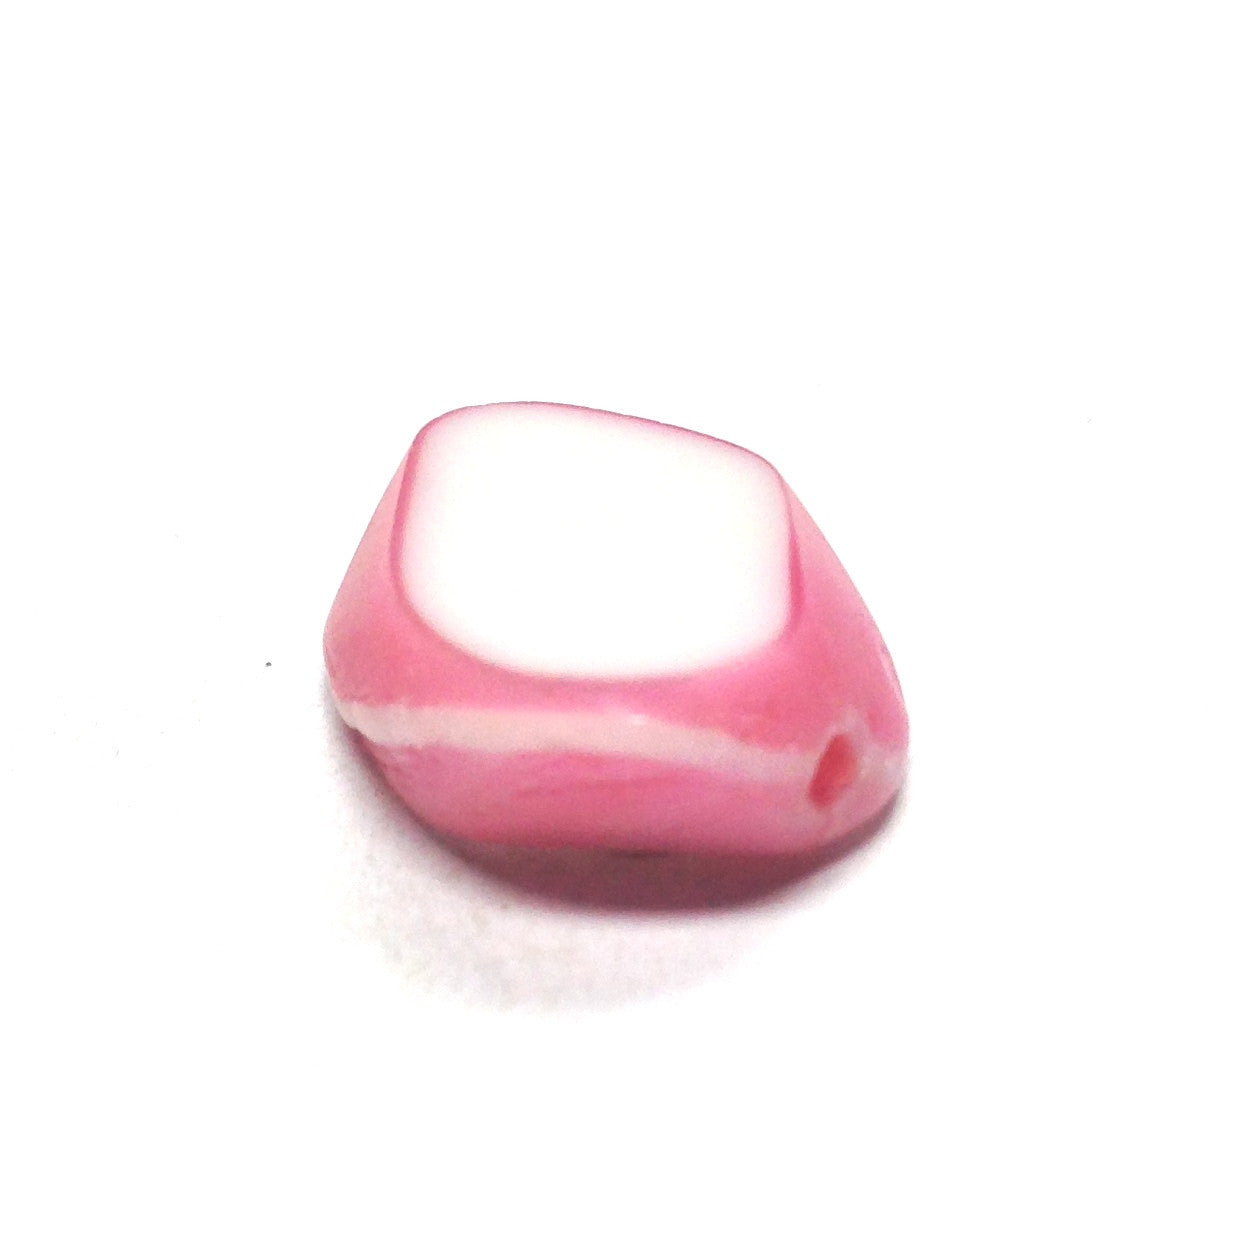 15X13MM Pink/White Glass Bead (72 pieces)